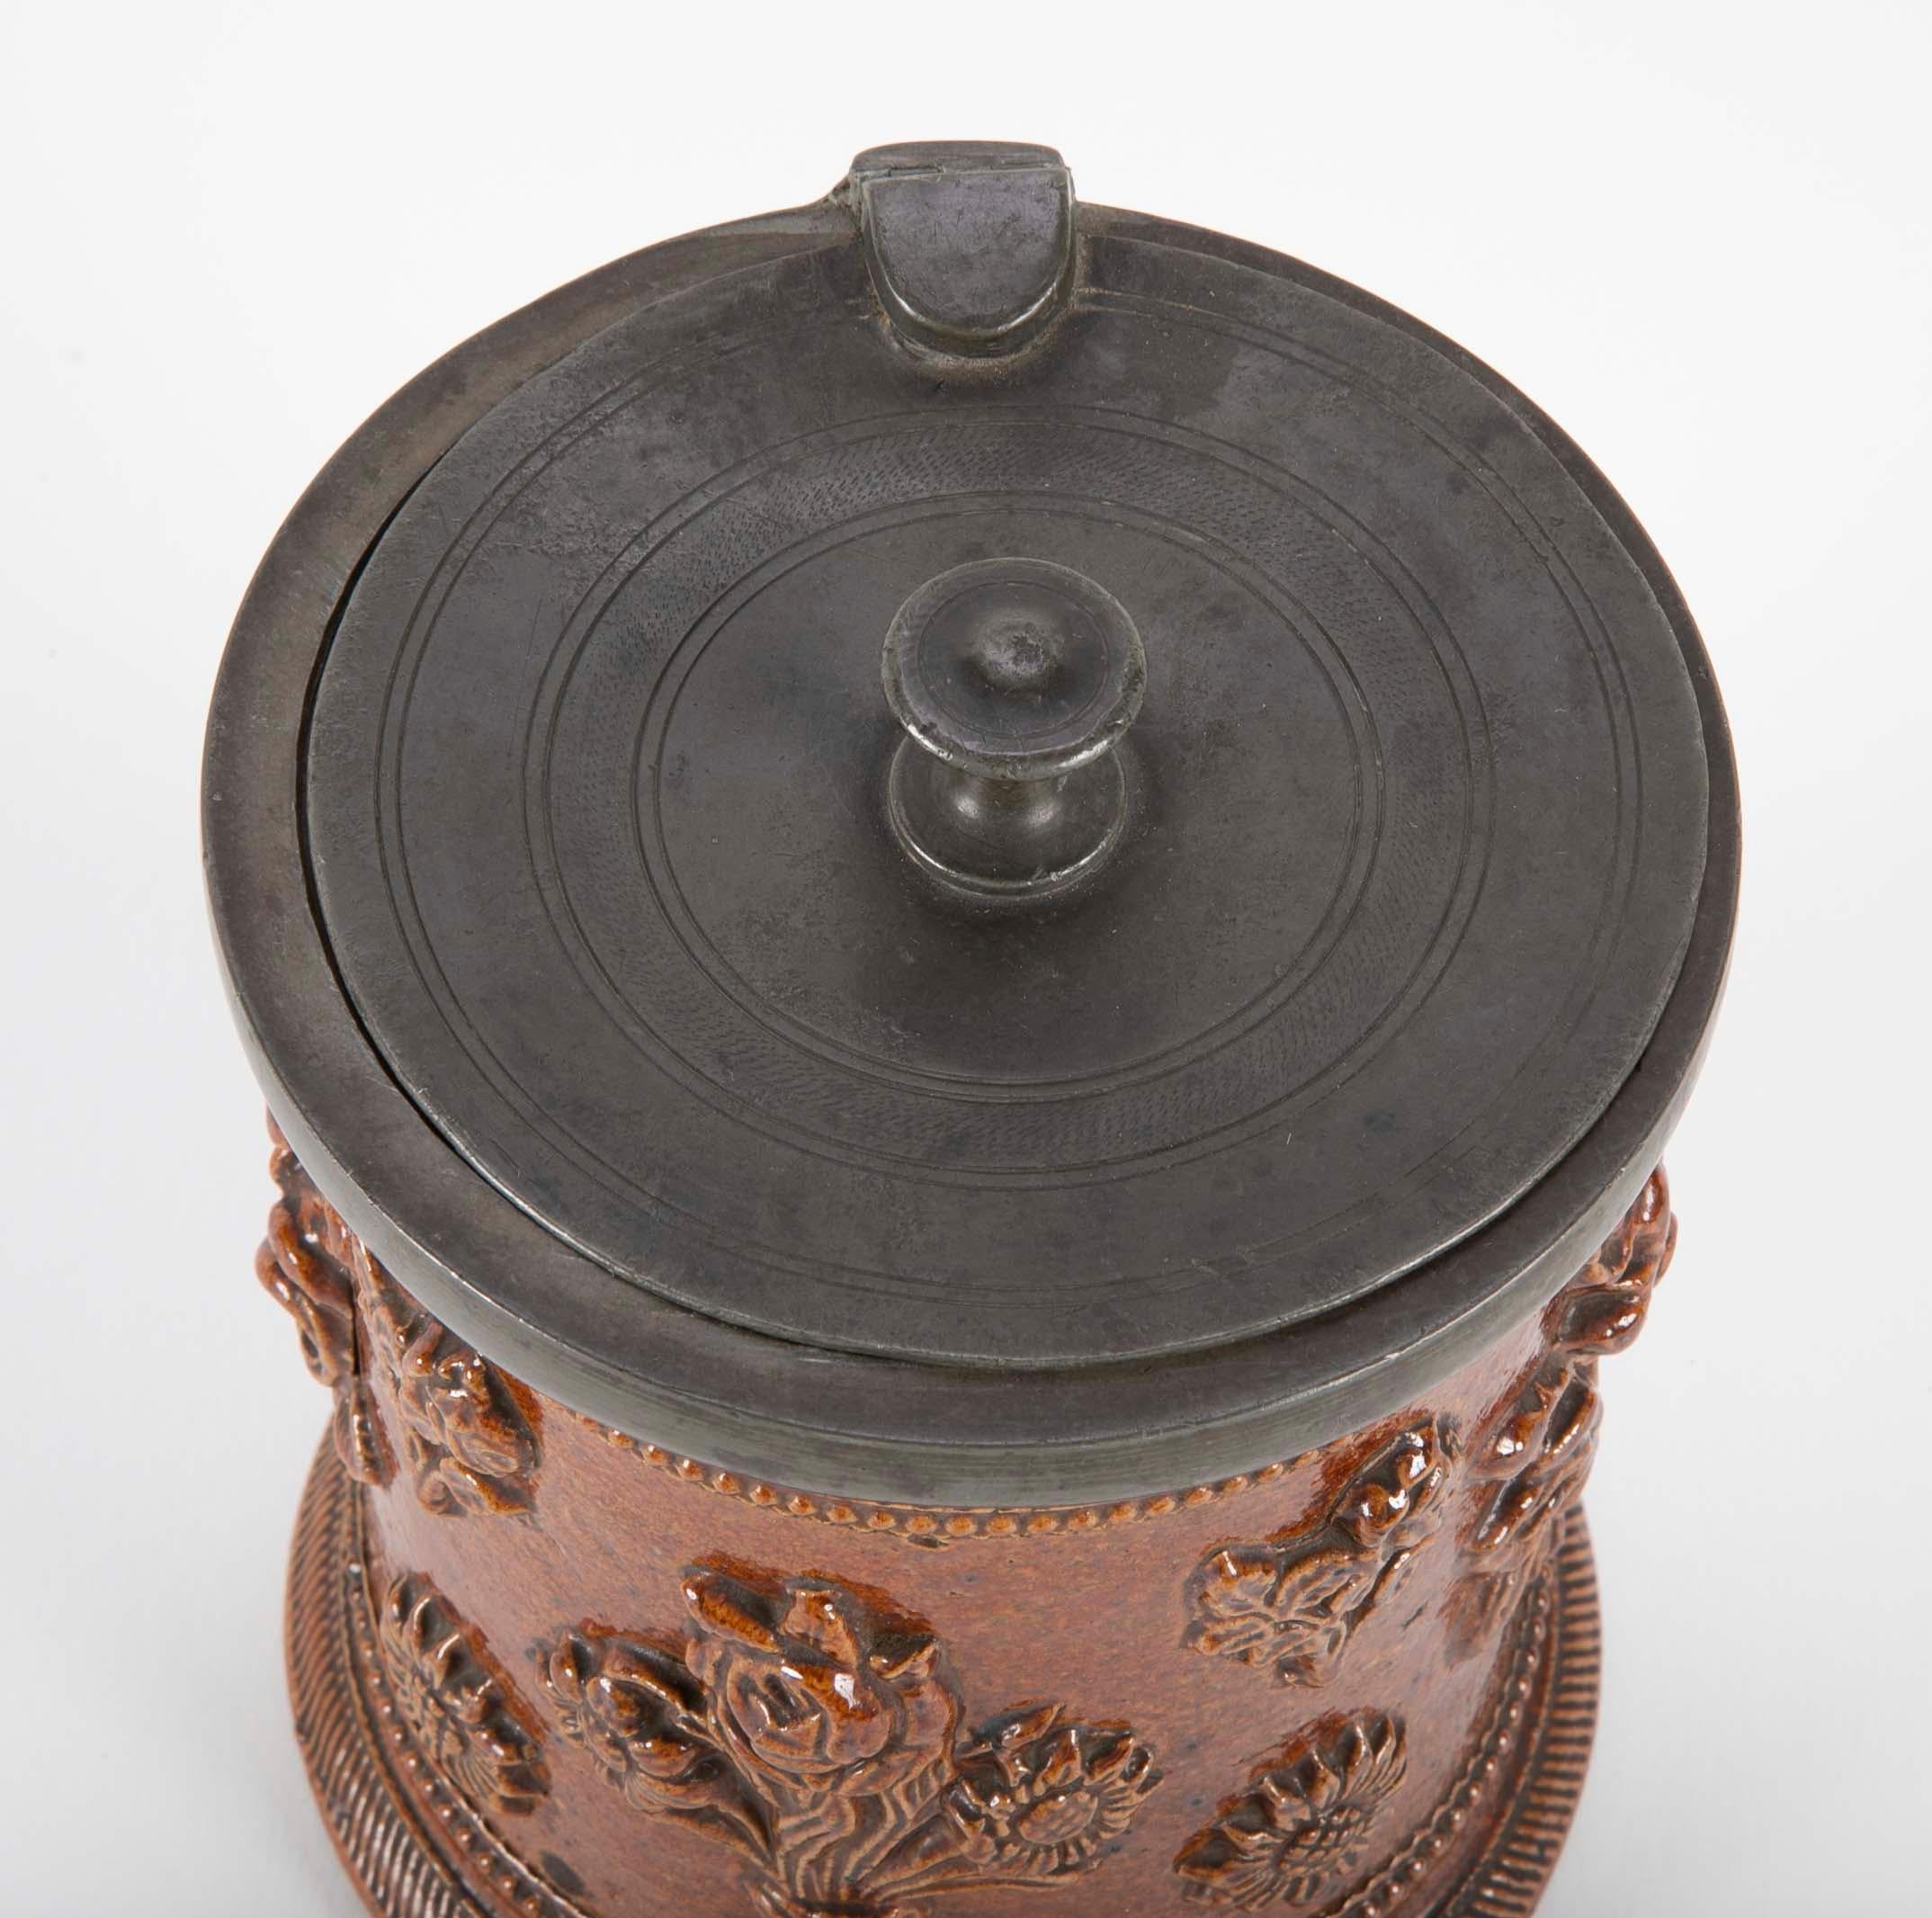 A fine example of a German Baroque tobacco jar with original pewter lid. The rich ocher salt glaze decorated with raised floral motifs. A handsome addition for the collector of pipes and tobacco accessories. Or as a beautiful and unique decorative